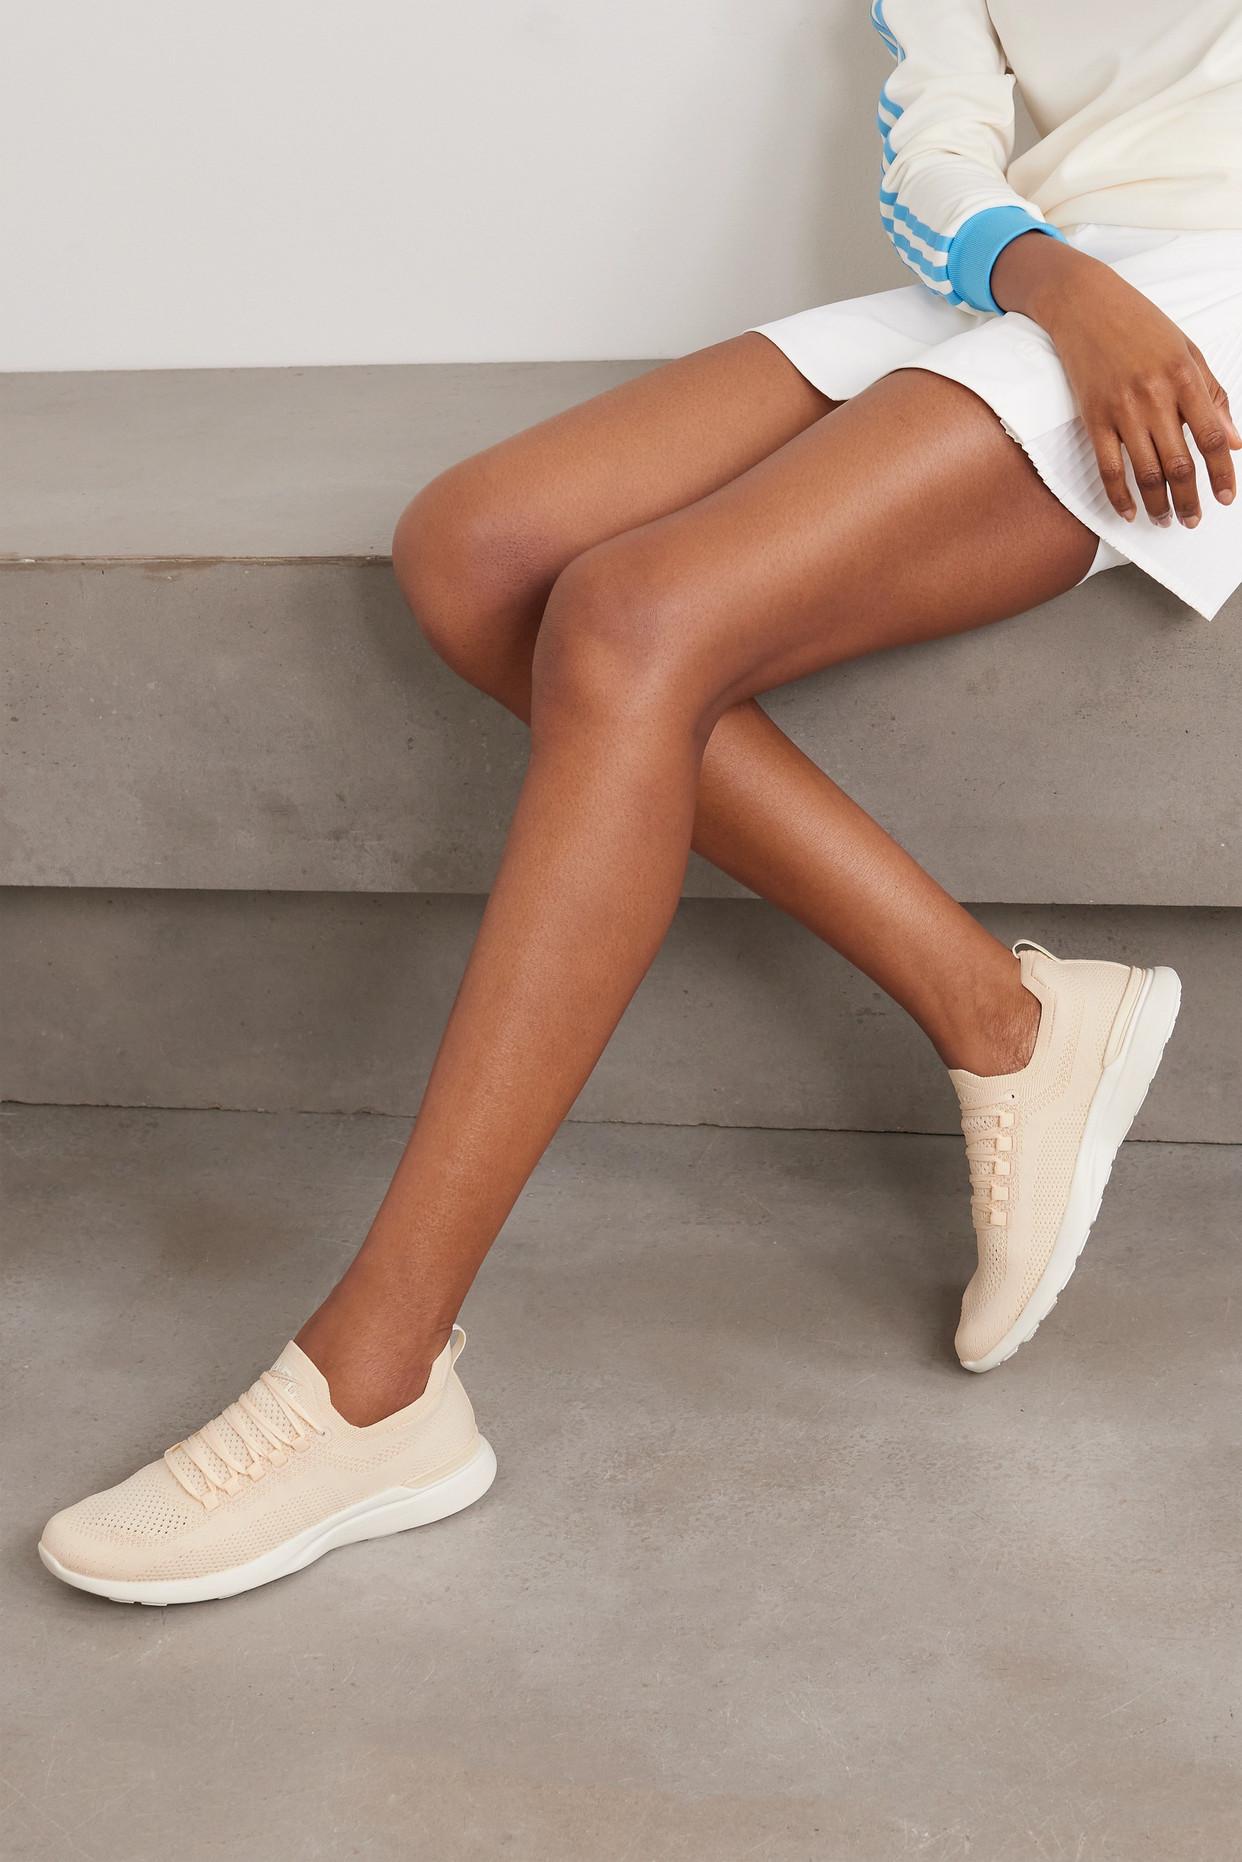 Athletic Propulsion Labs Techloom Breeze Mesh Sneakers in Natural | Lyst